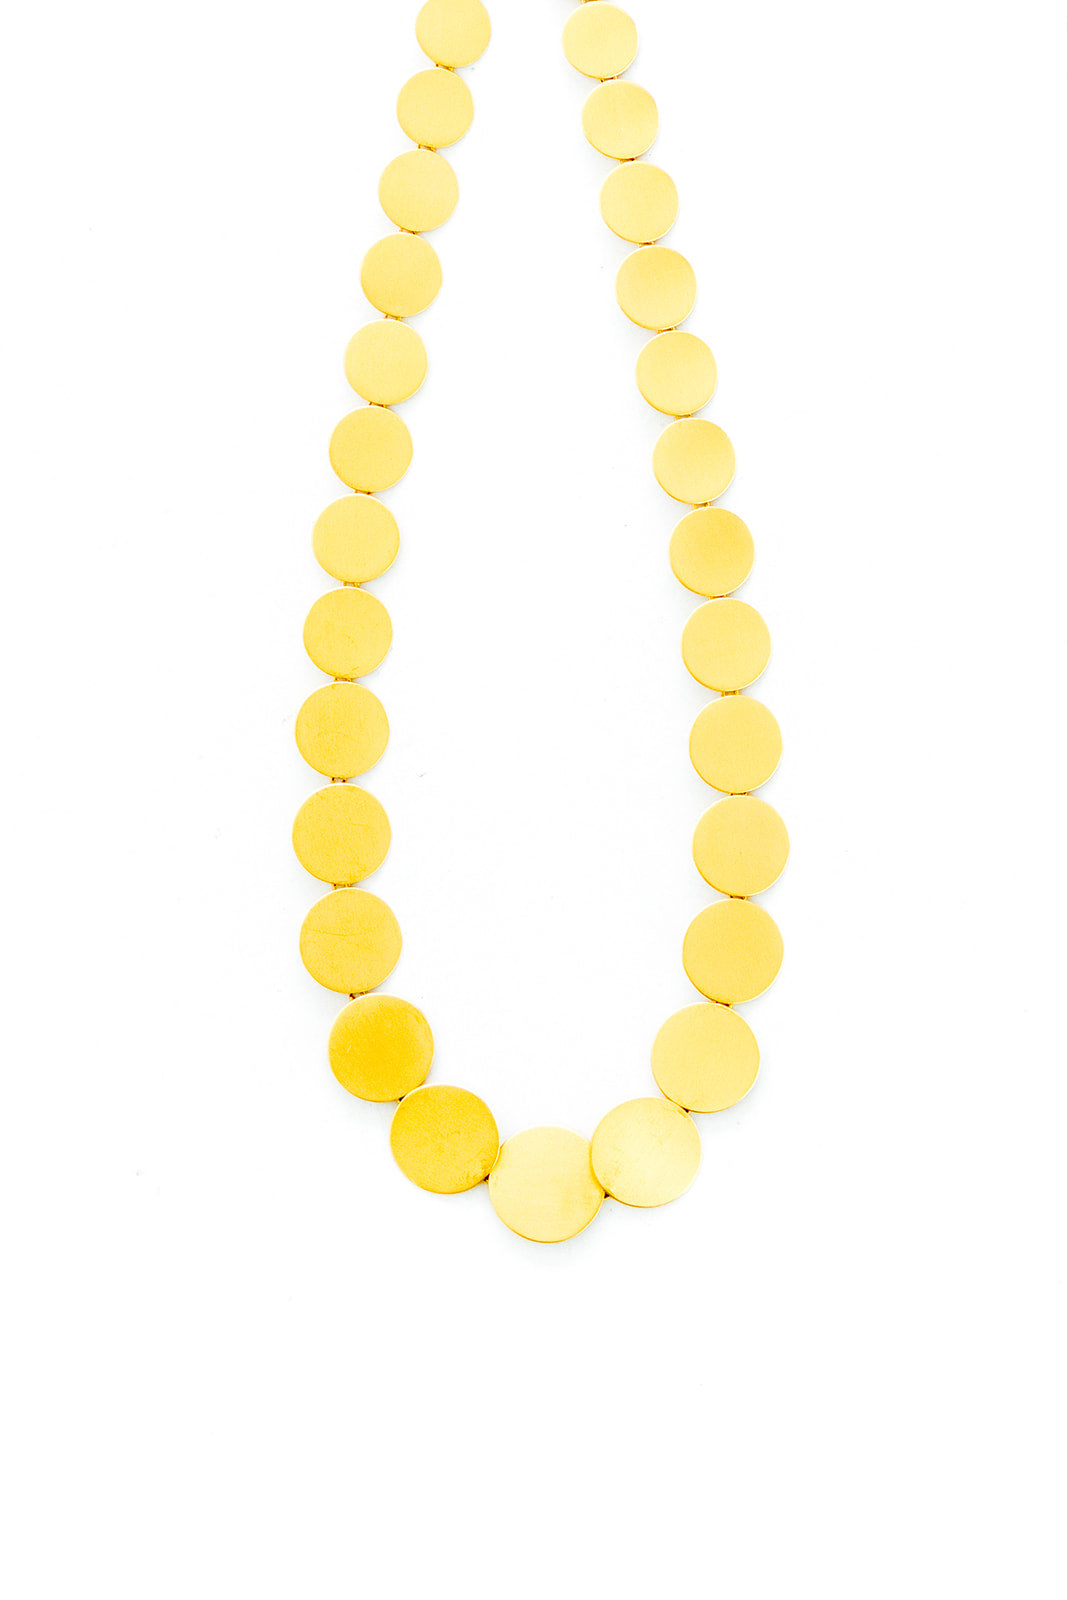 Marie-Helene-de-Taillac-22K-Yellow-Gold-Dot-Necklace-Amarees